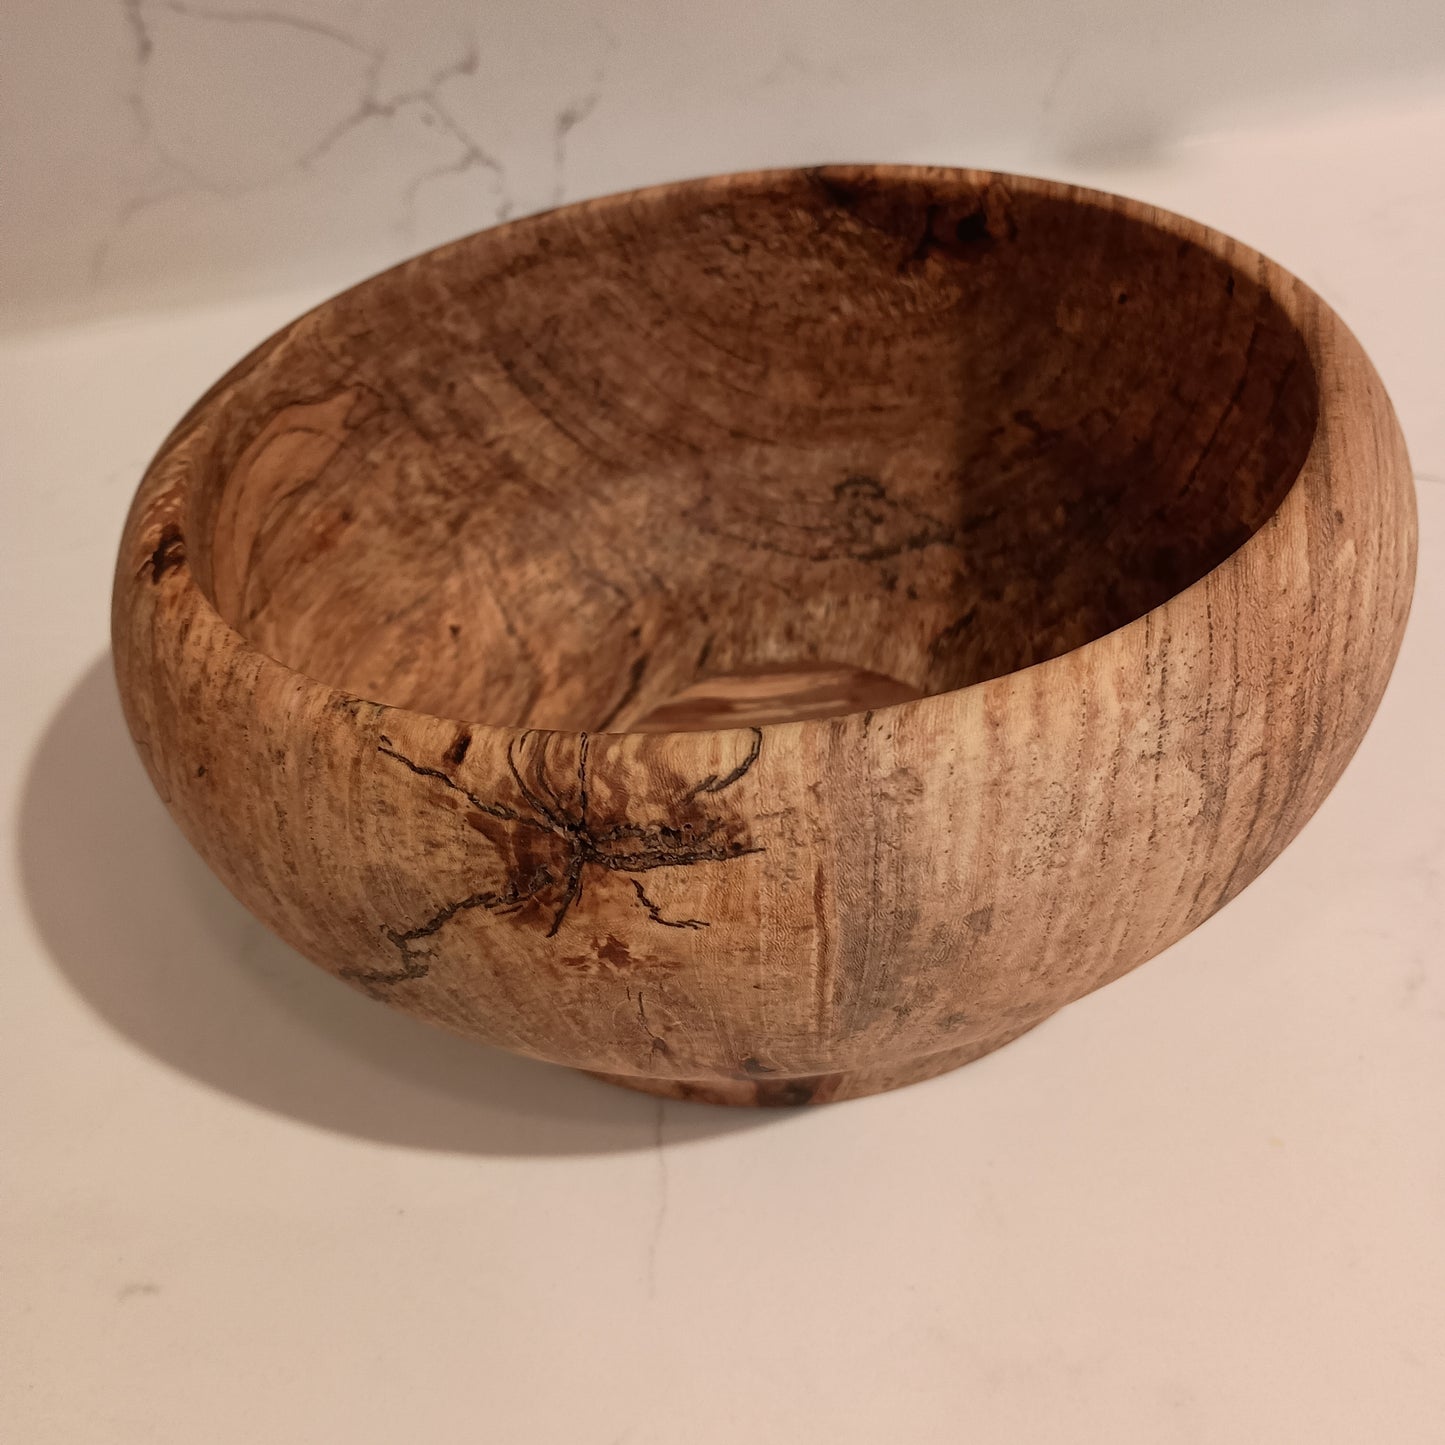 Spalted Pecan Bowl with Bradford Pear Bottom Insert, 7" x 3.25"